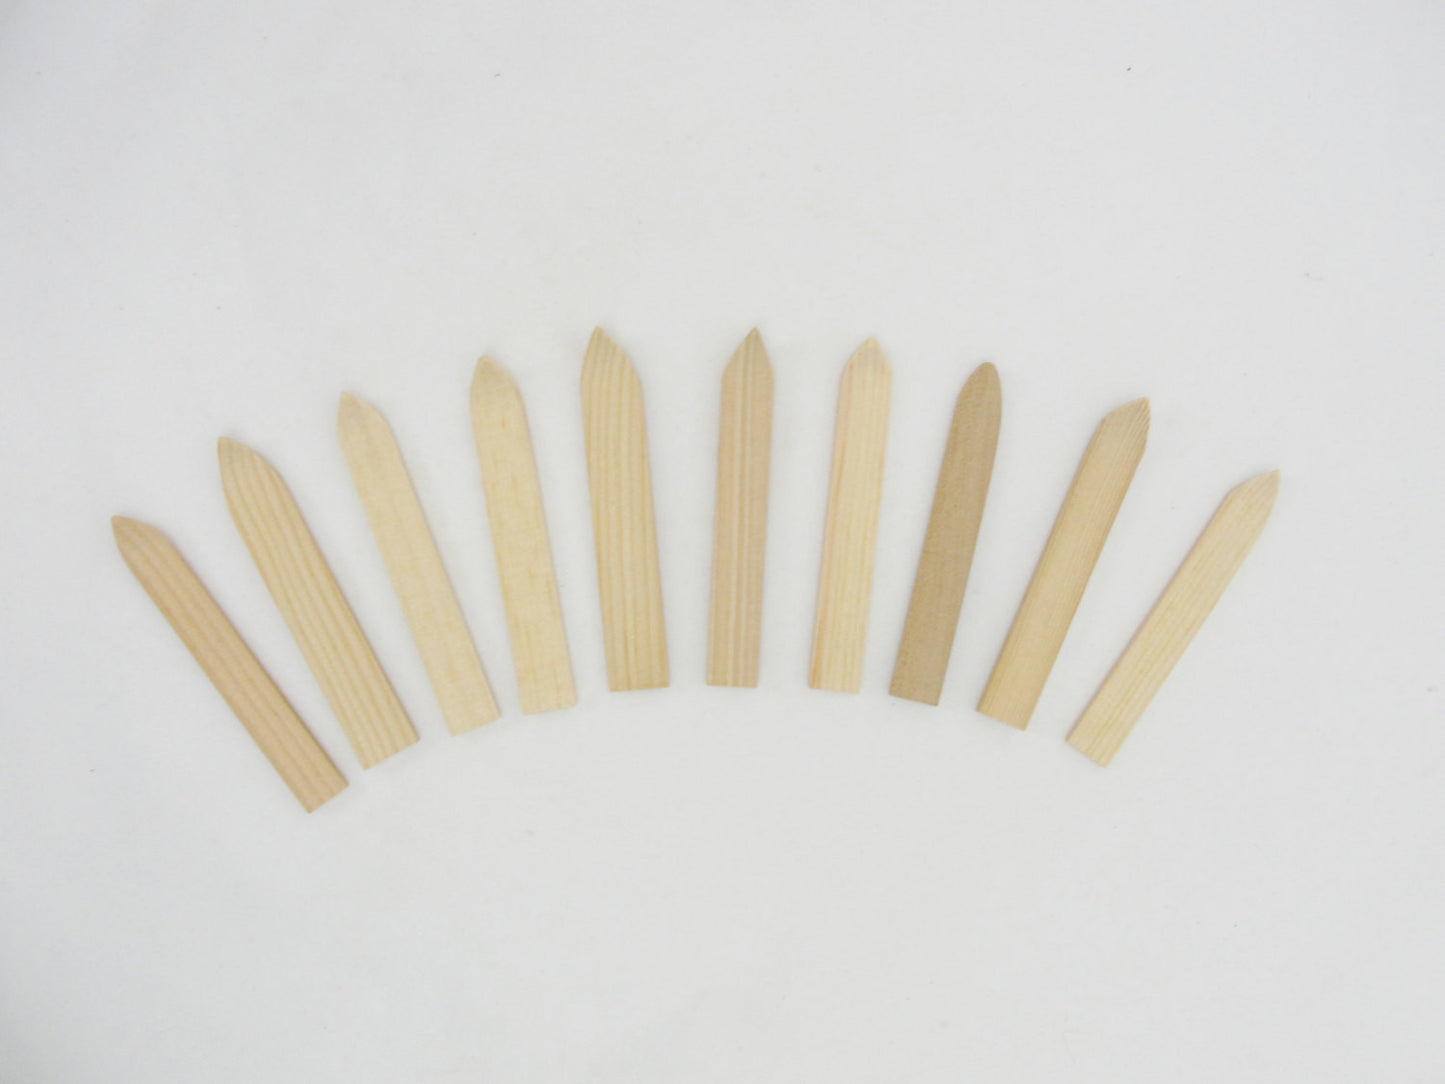 Tiny wooden skis 3 1/2" long 5 pairs - Wood parts - Craft Supply House